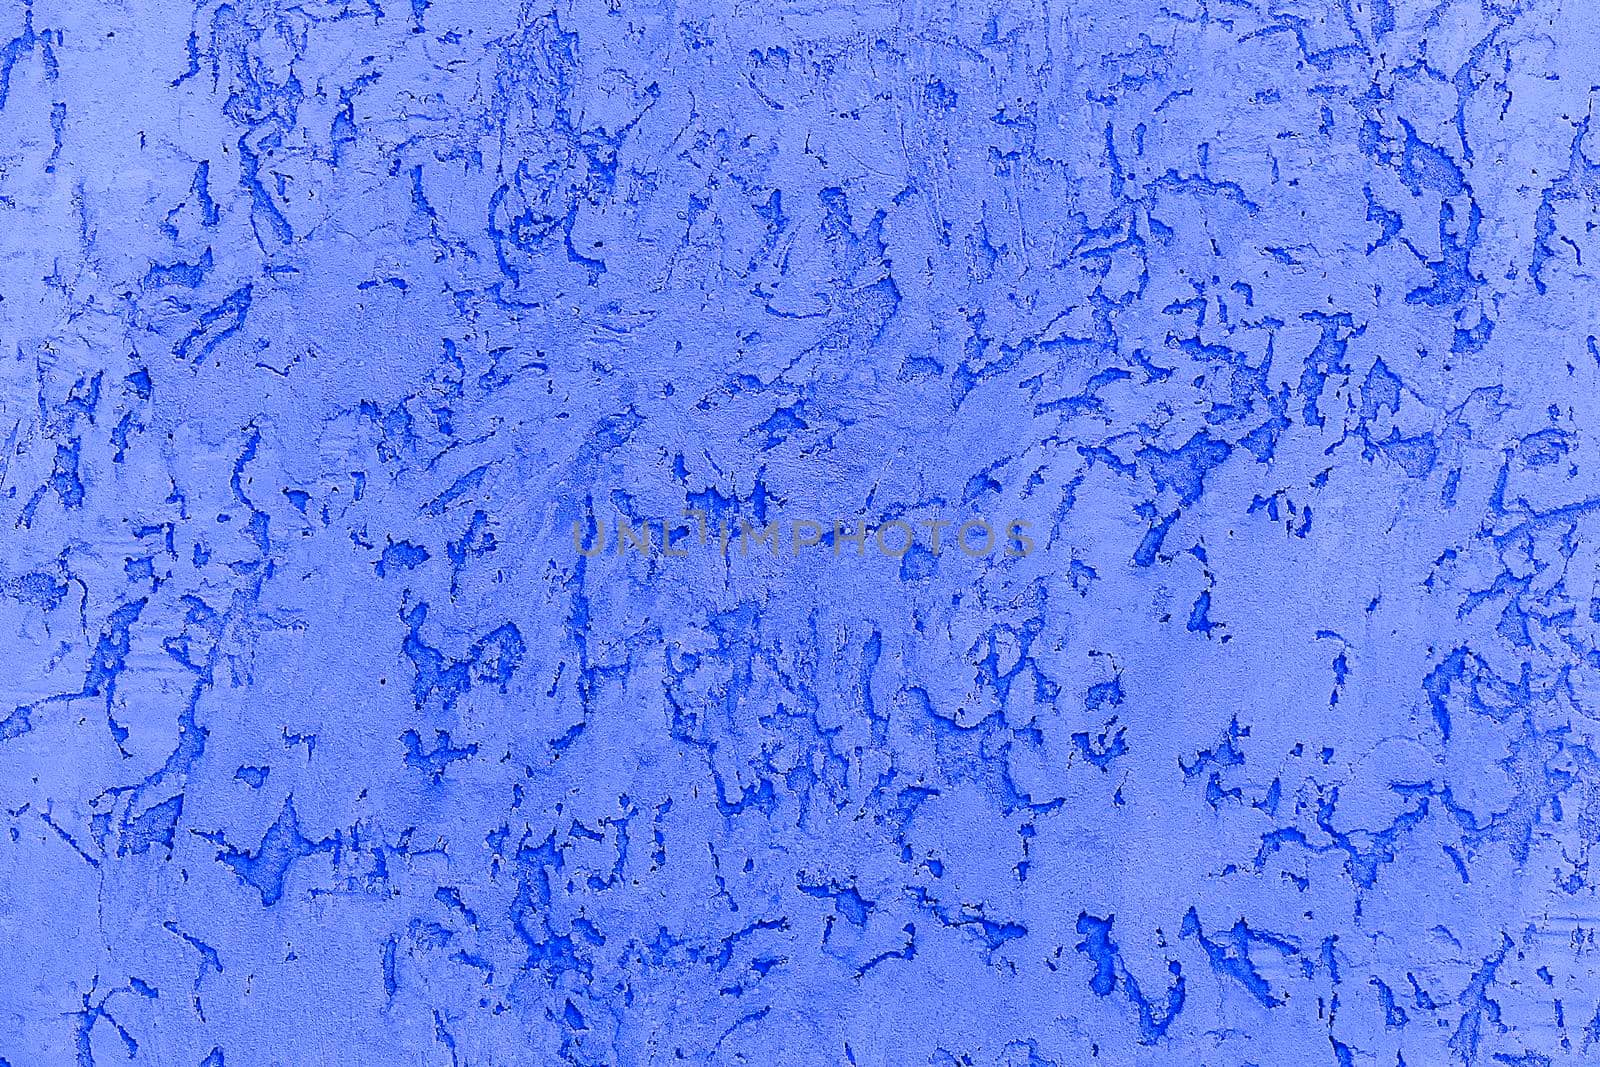 Blue Venetian plaster on the wall decor. Abstract background. by Essffes